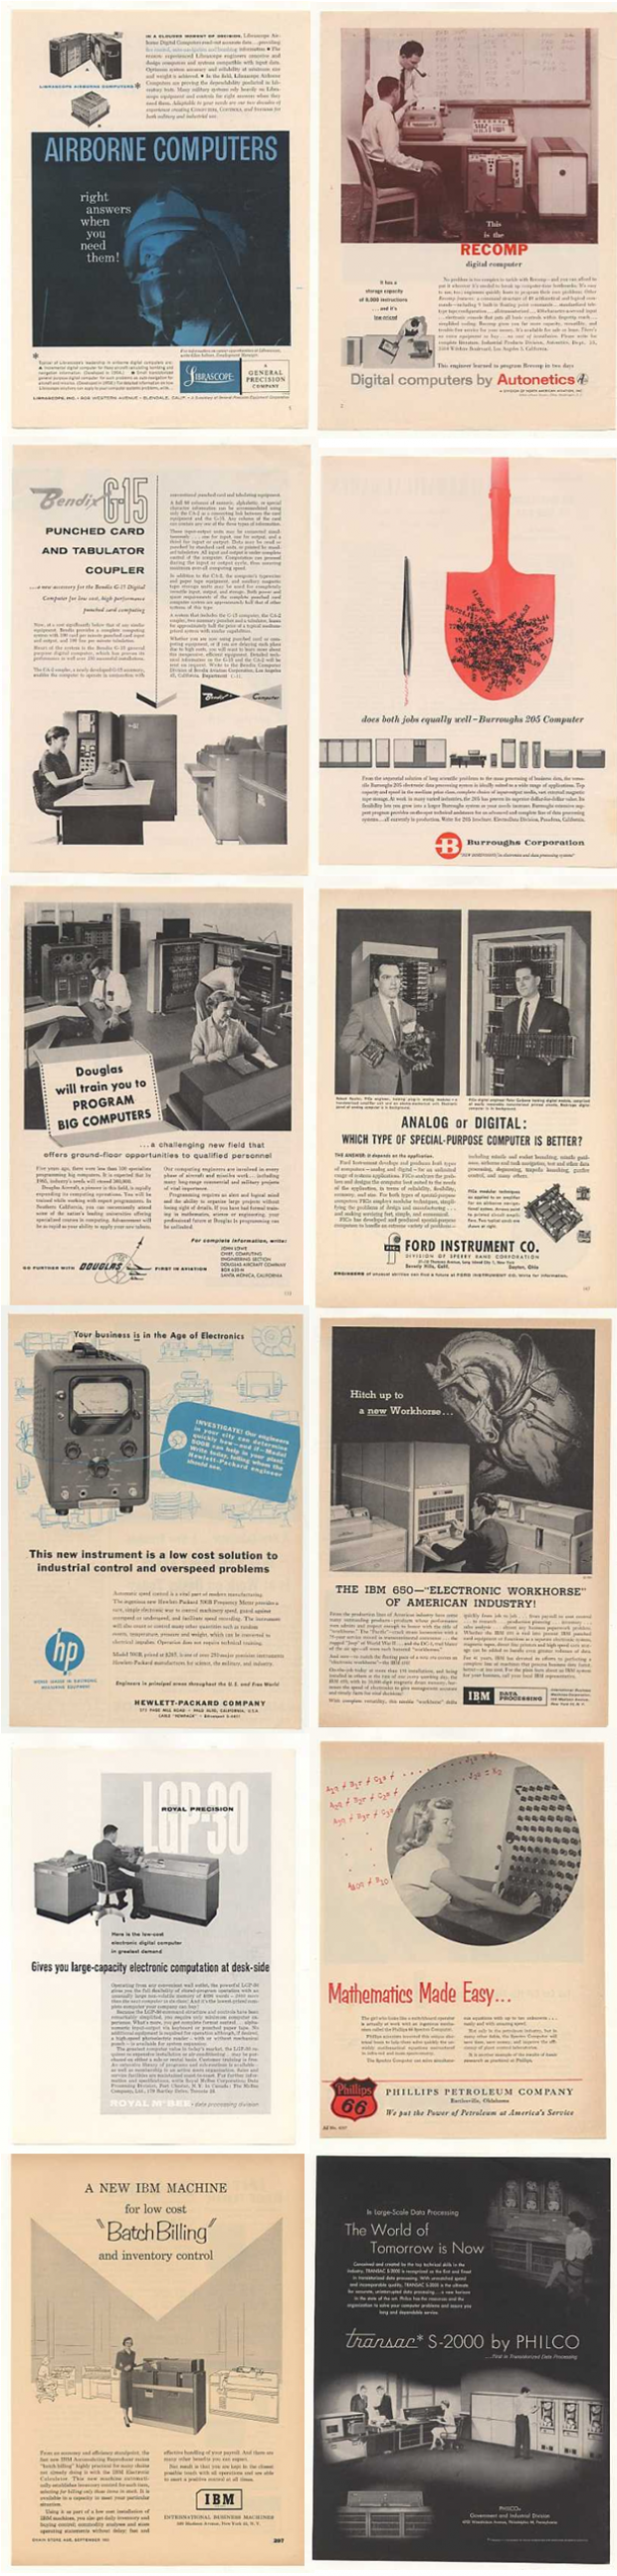 Vintage Computer Ads from the 1950’s